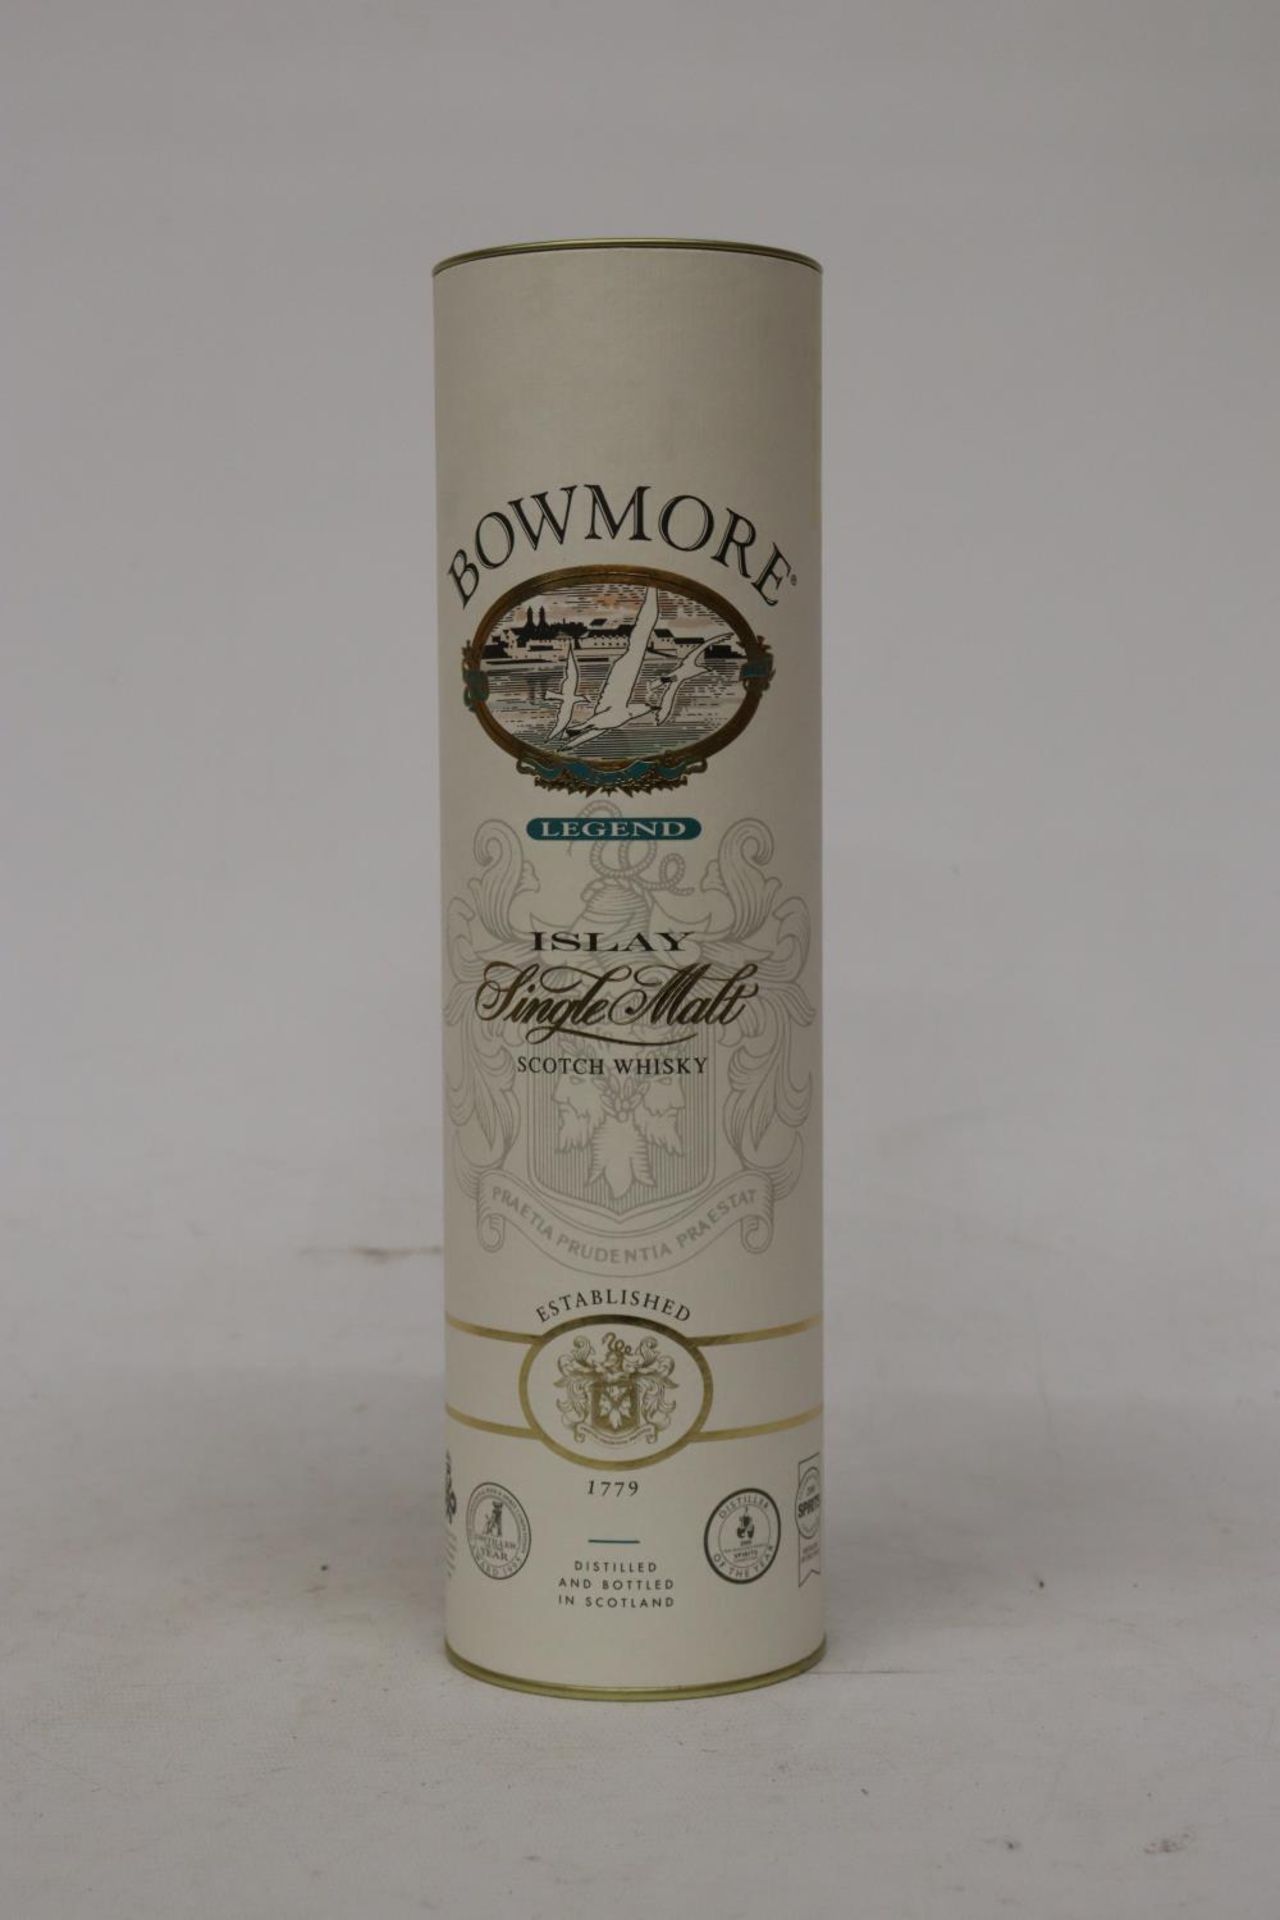 A BOTTLE OF BOWMORE LEGEND ISLAY SINGLE MALT WHISKY, BOXED - Image 4 of 5